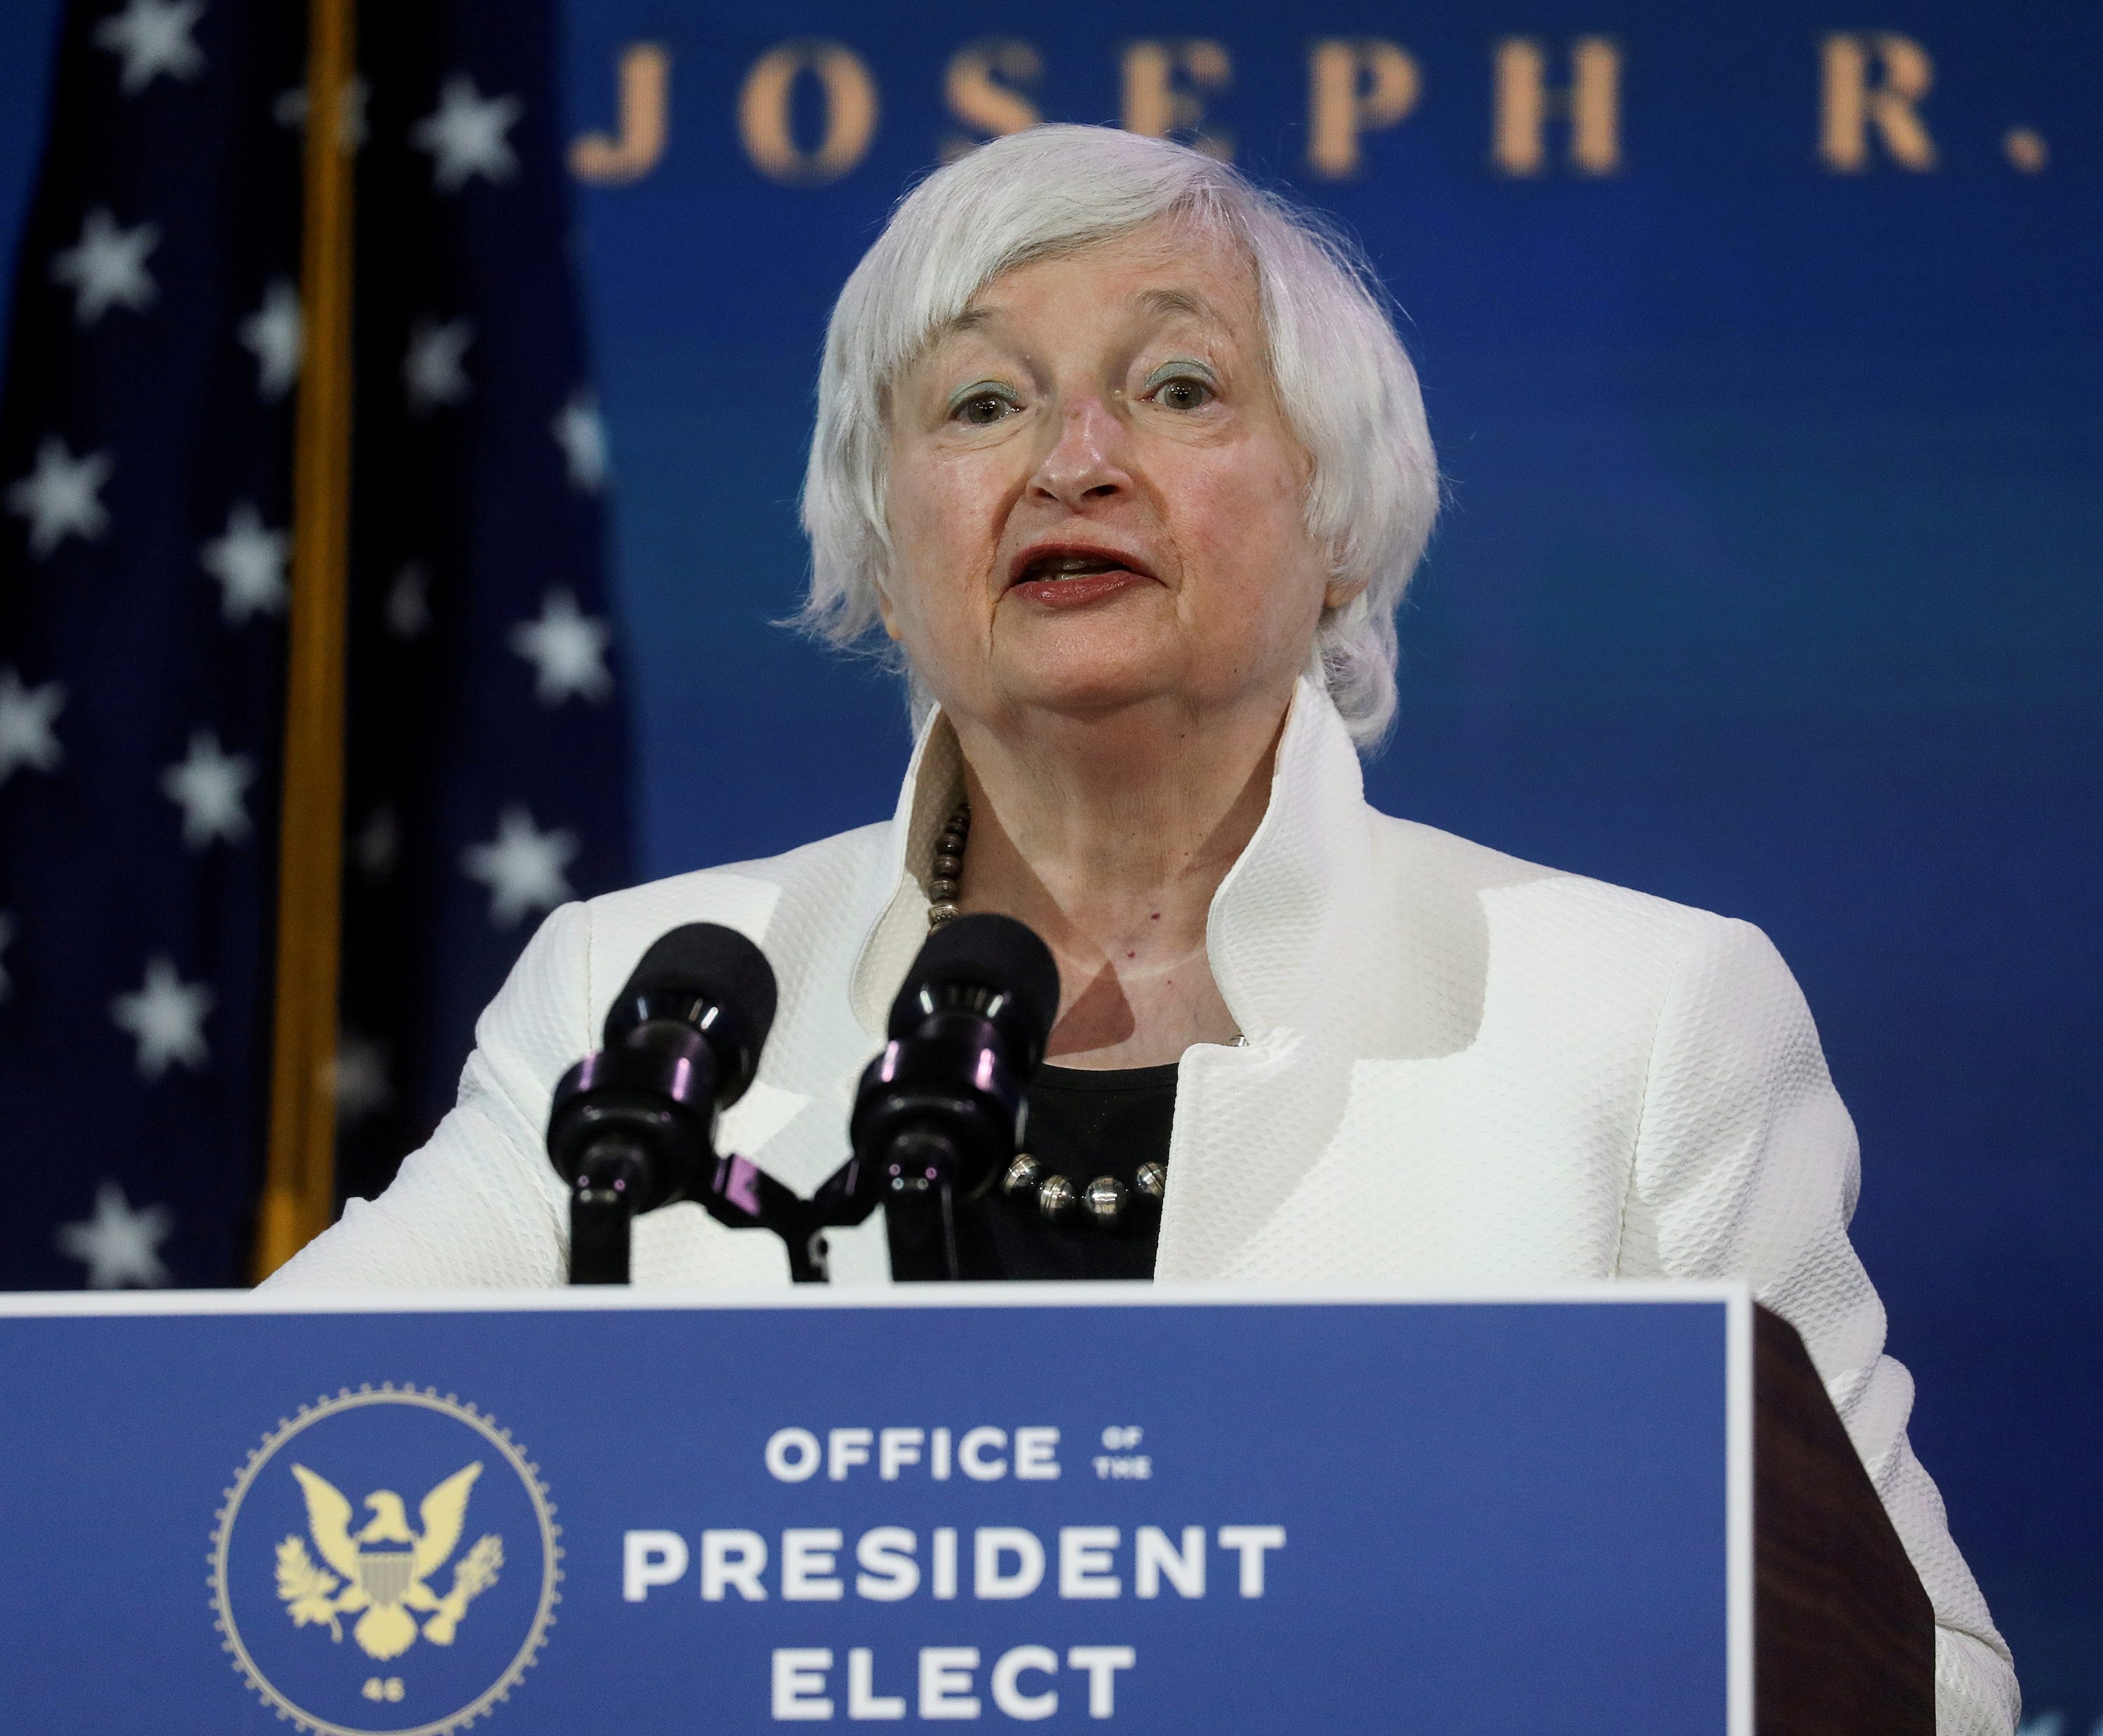 Yellen-backed policies set to aid risk assets, raise longer-term worries